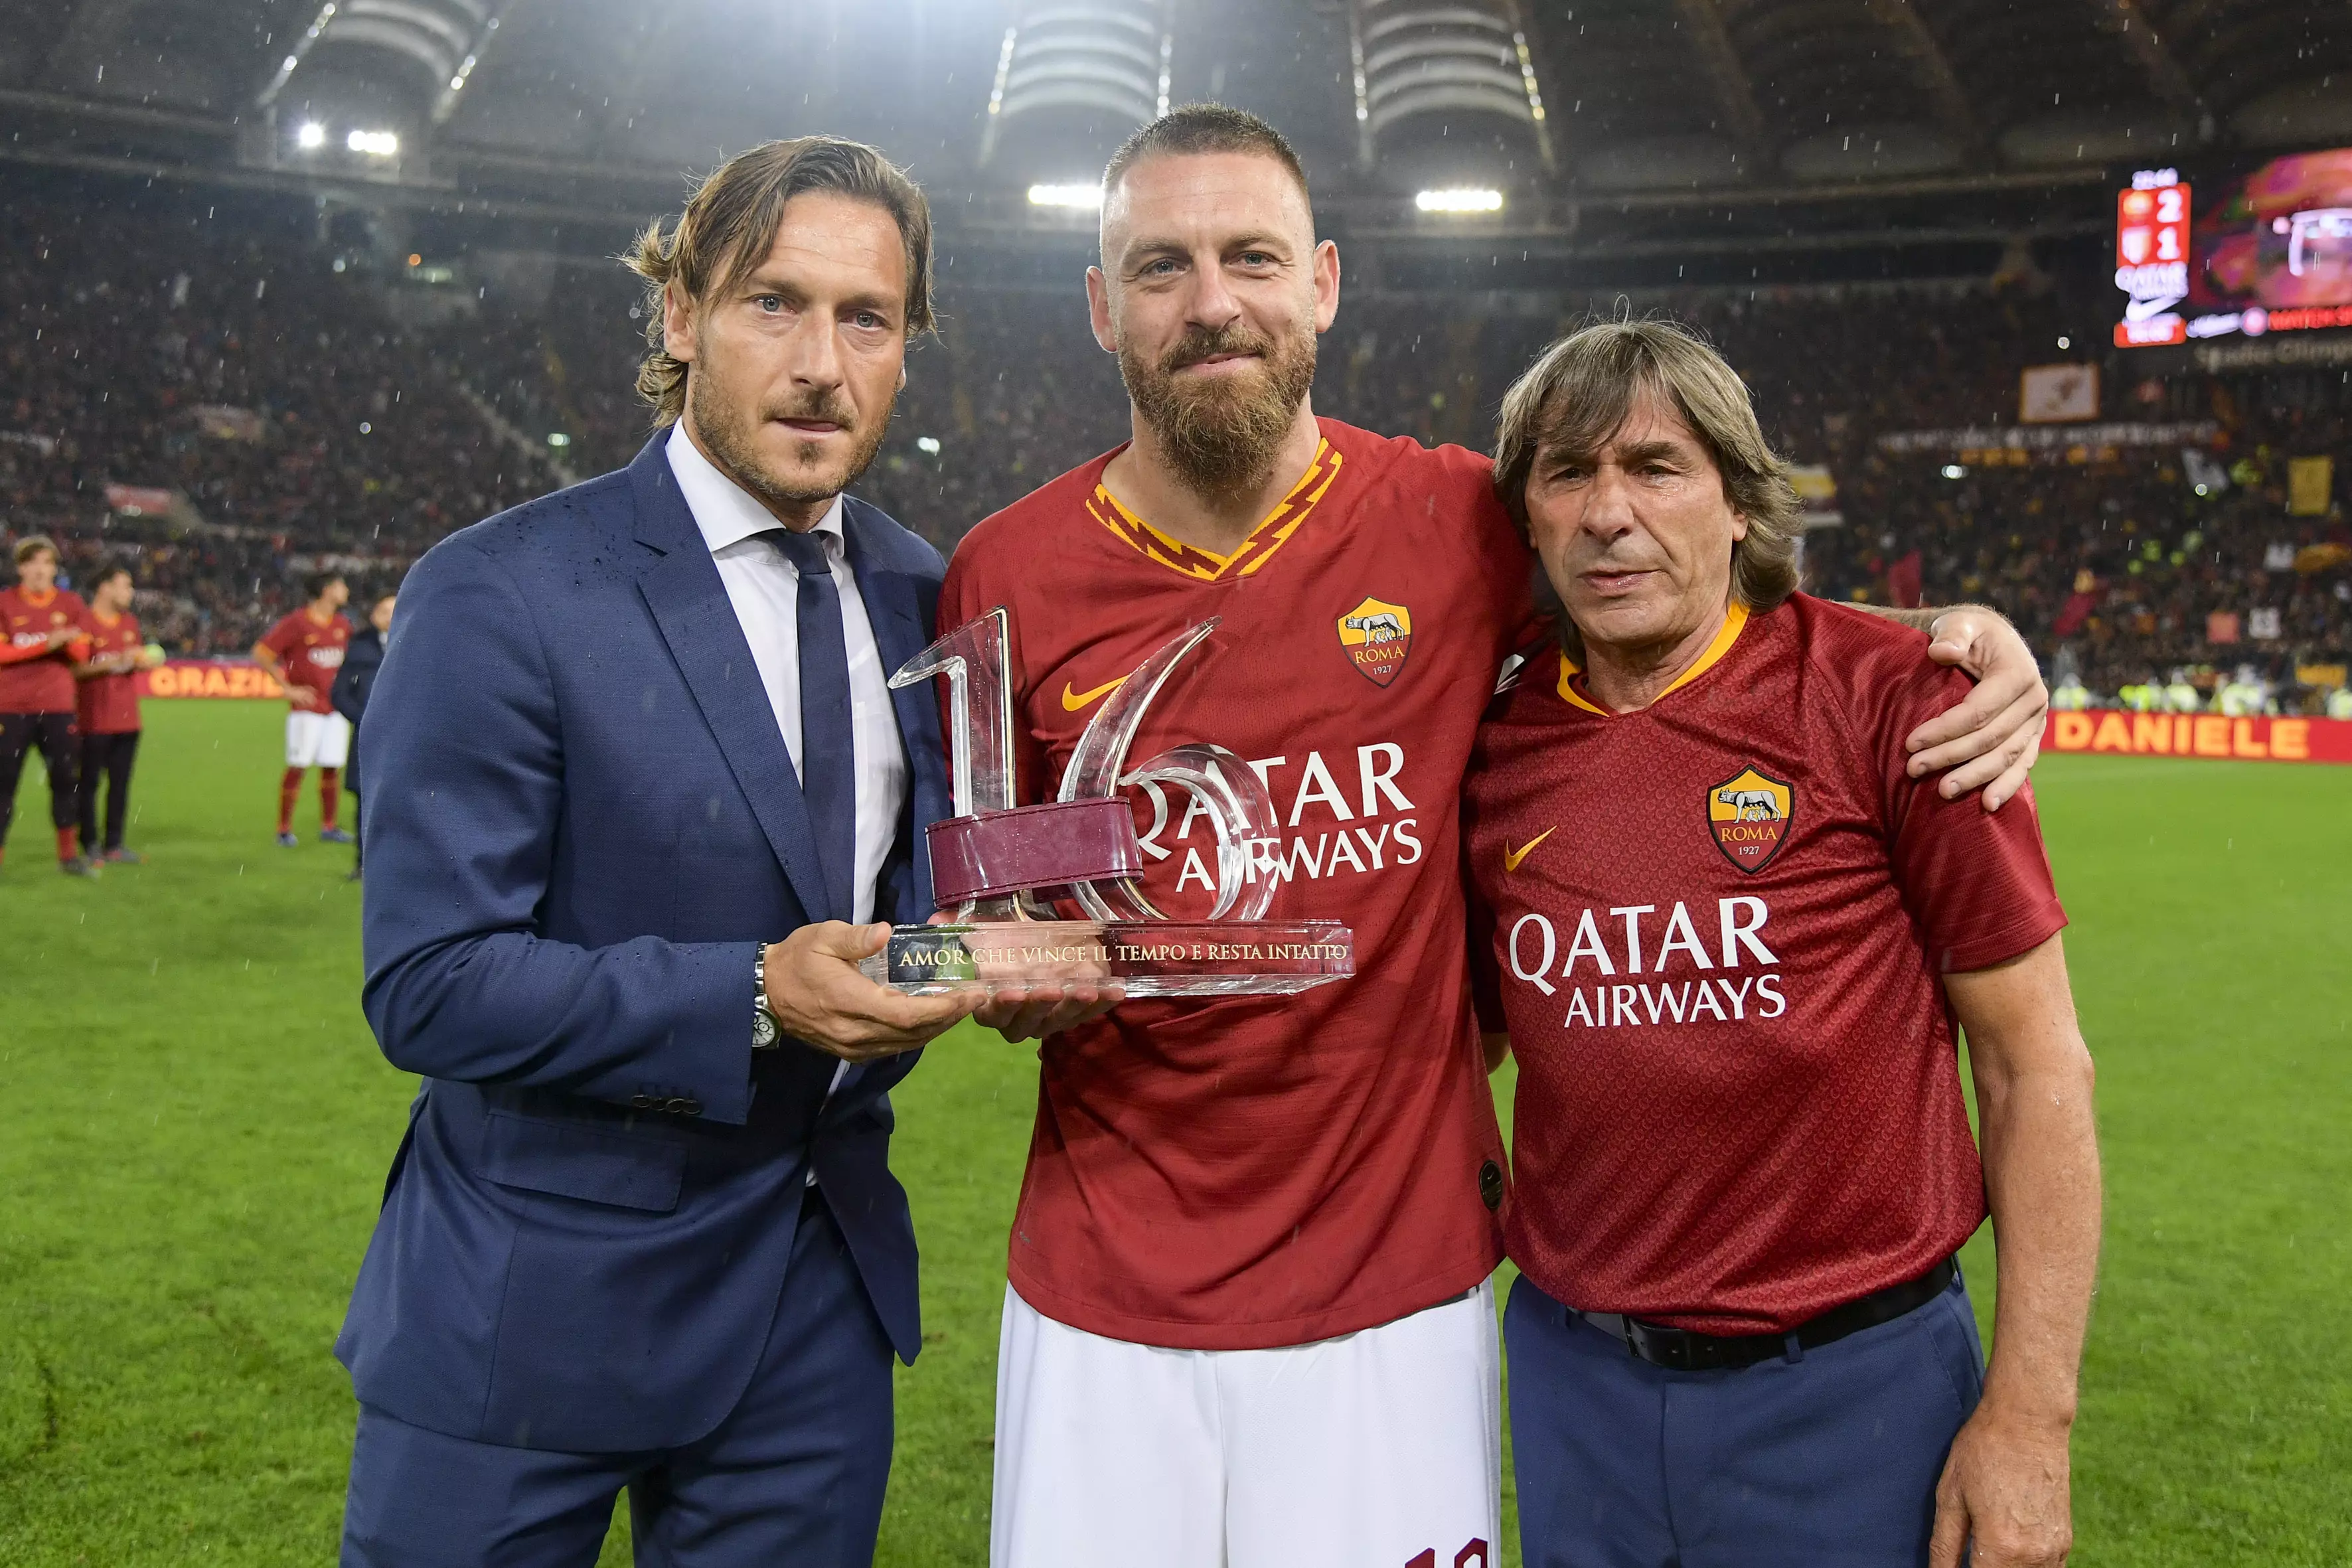 Totti as club director when former teammate Daniele de Rossi was leaving the club. Image: PA Images